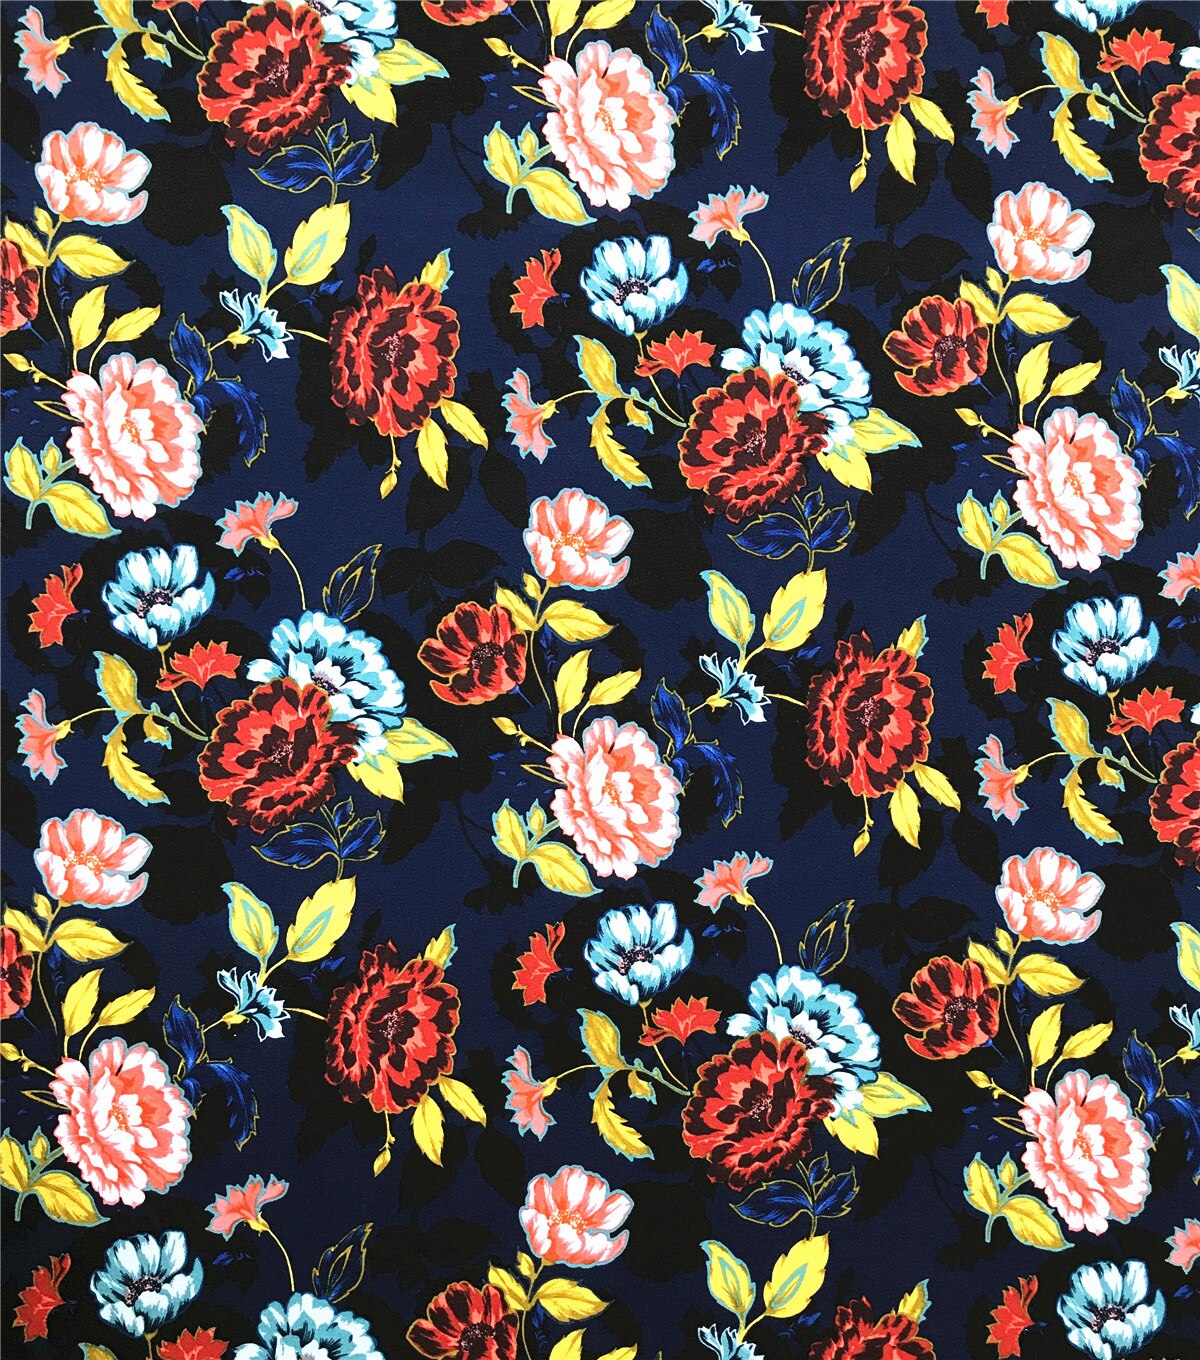 Ember Knit Prints Double Brushed Fabric-Navy Multi Floral | JOANN